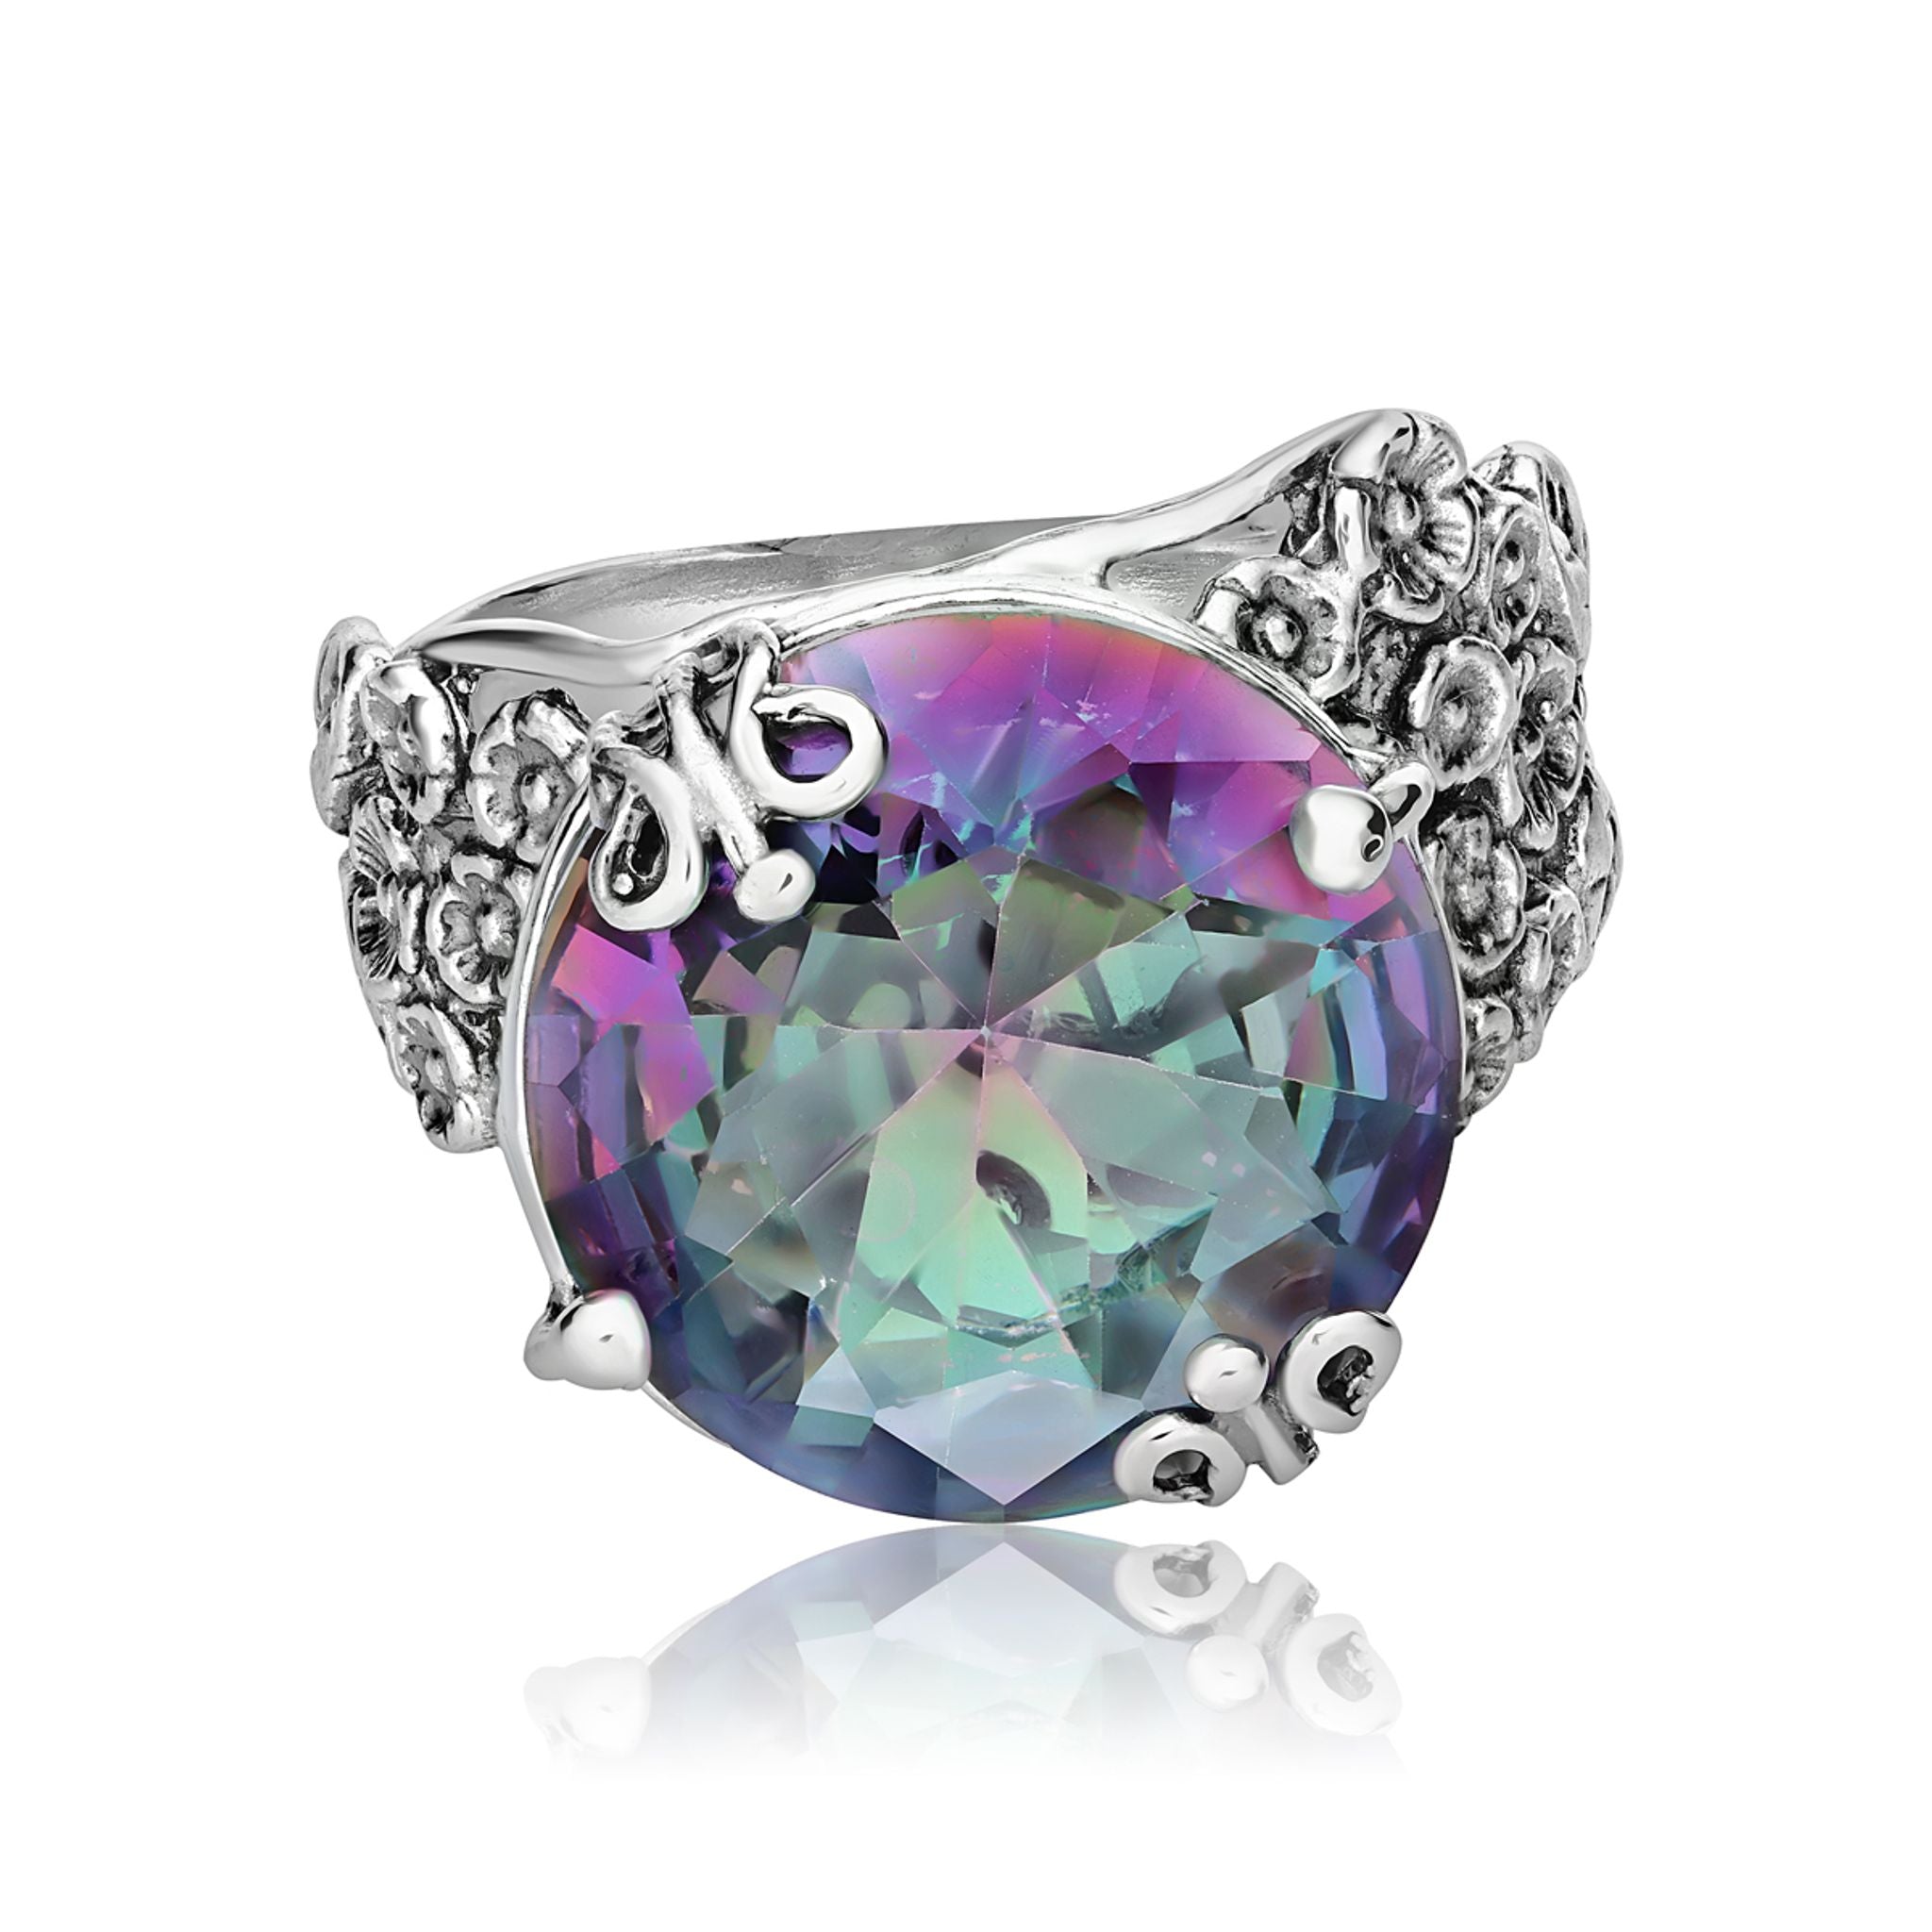 Floral Sterling Silver Mystic Crystal Ring